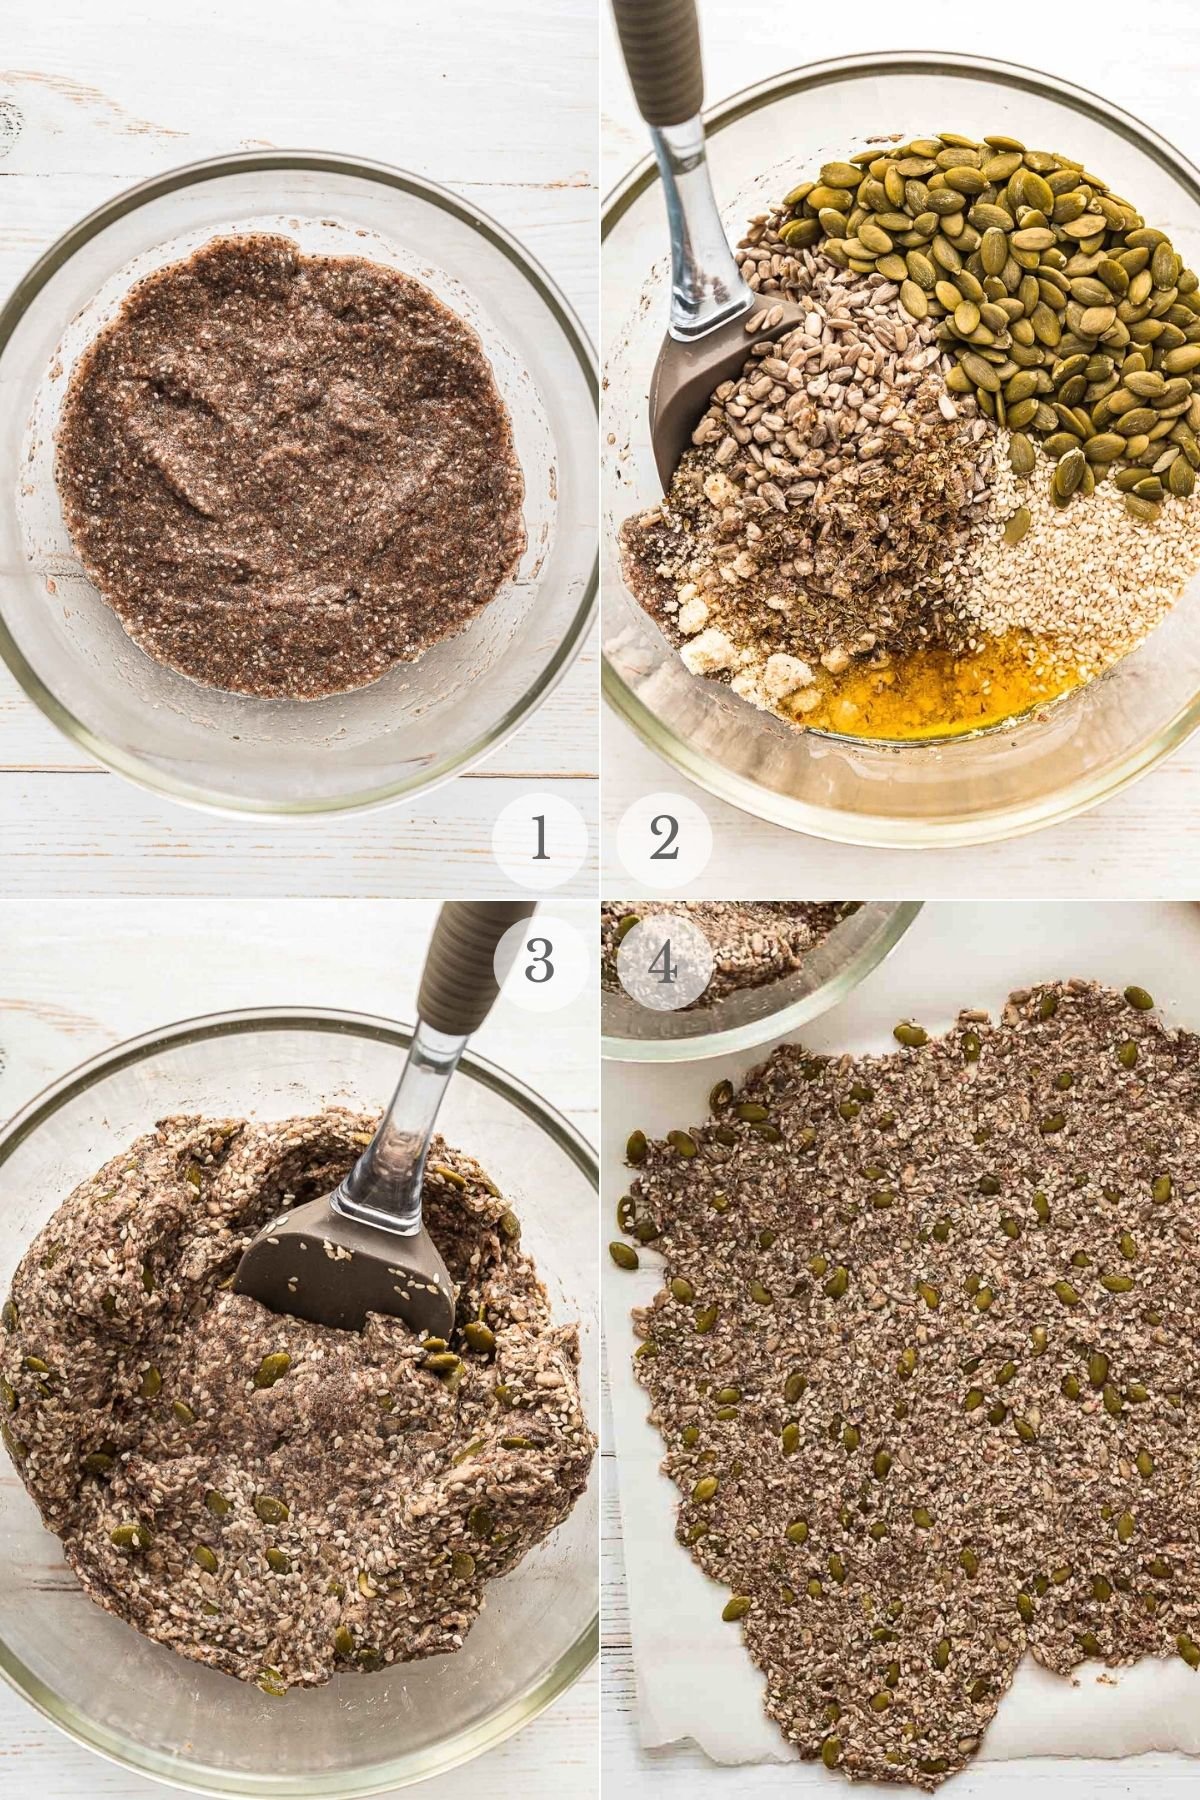 seed crackers recipe steps 1-4